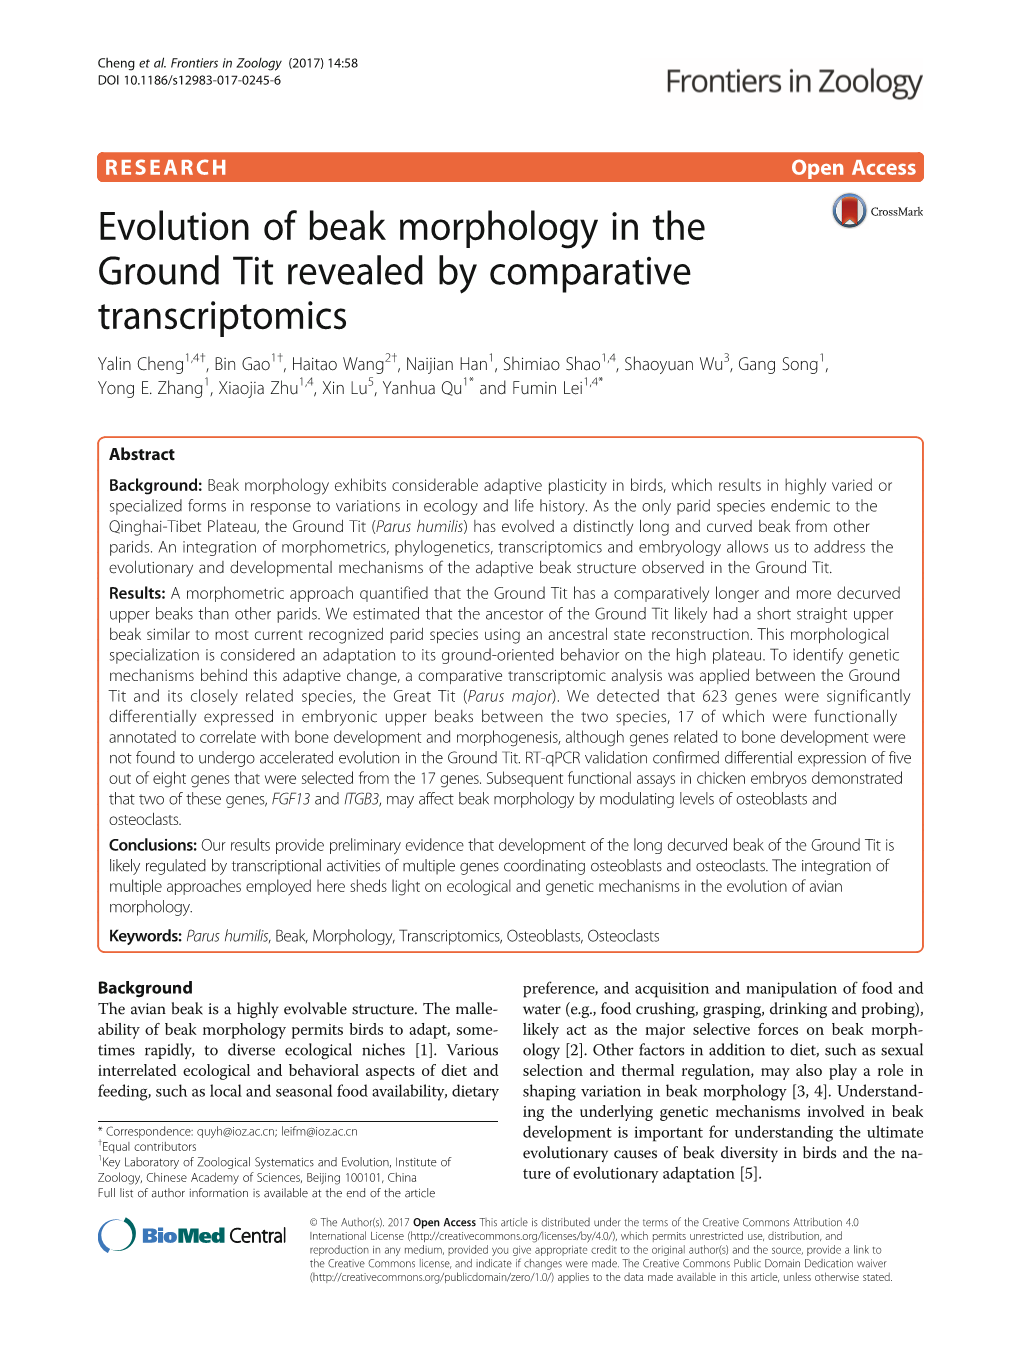 Evolution of Beak Morphology in the Ground Tit Revealed by Comparative